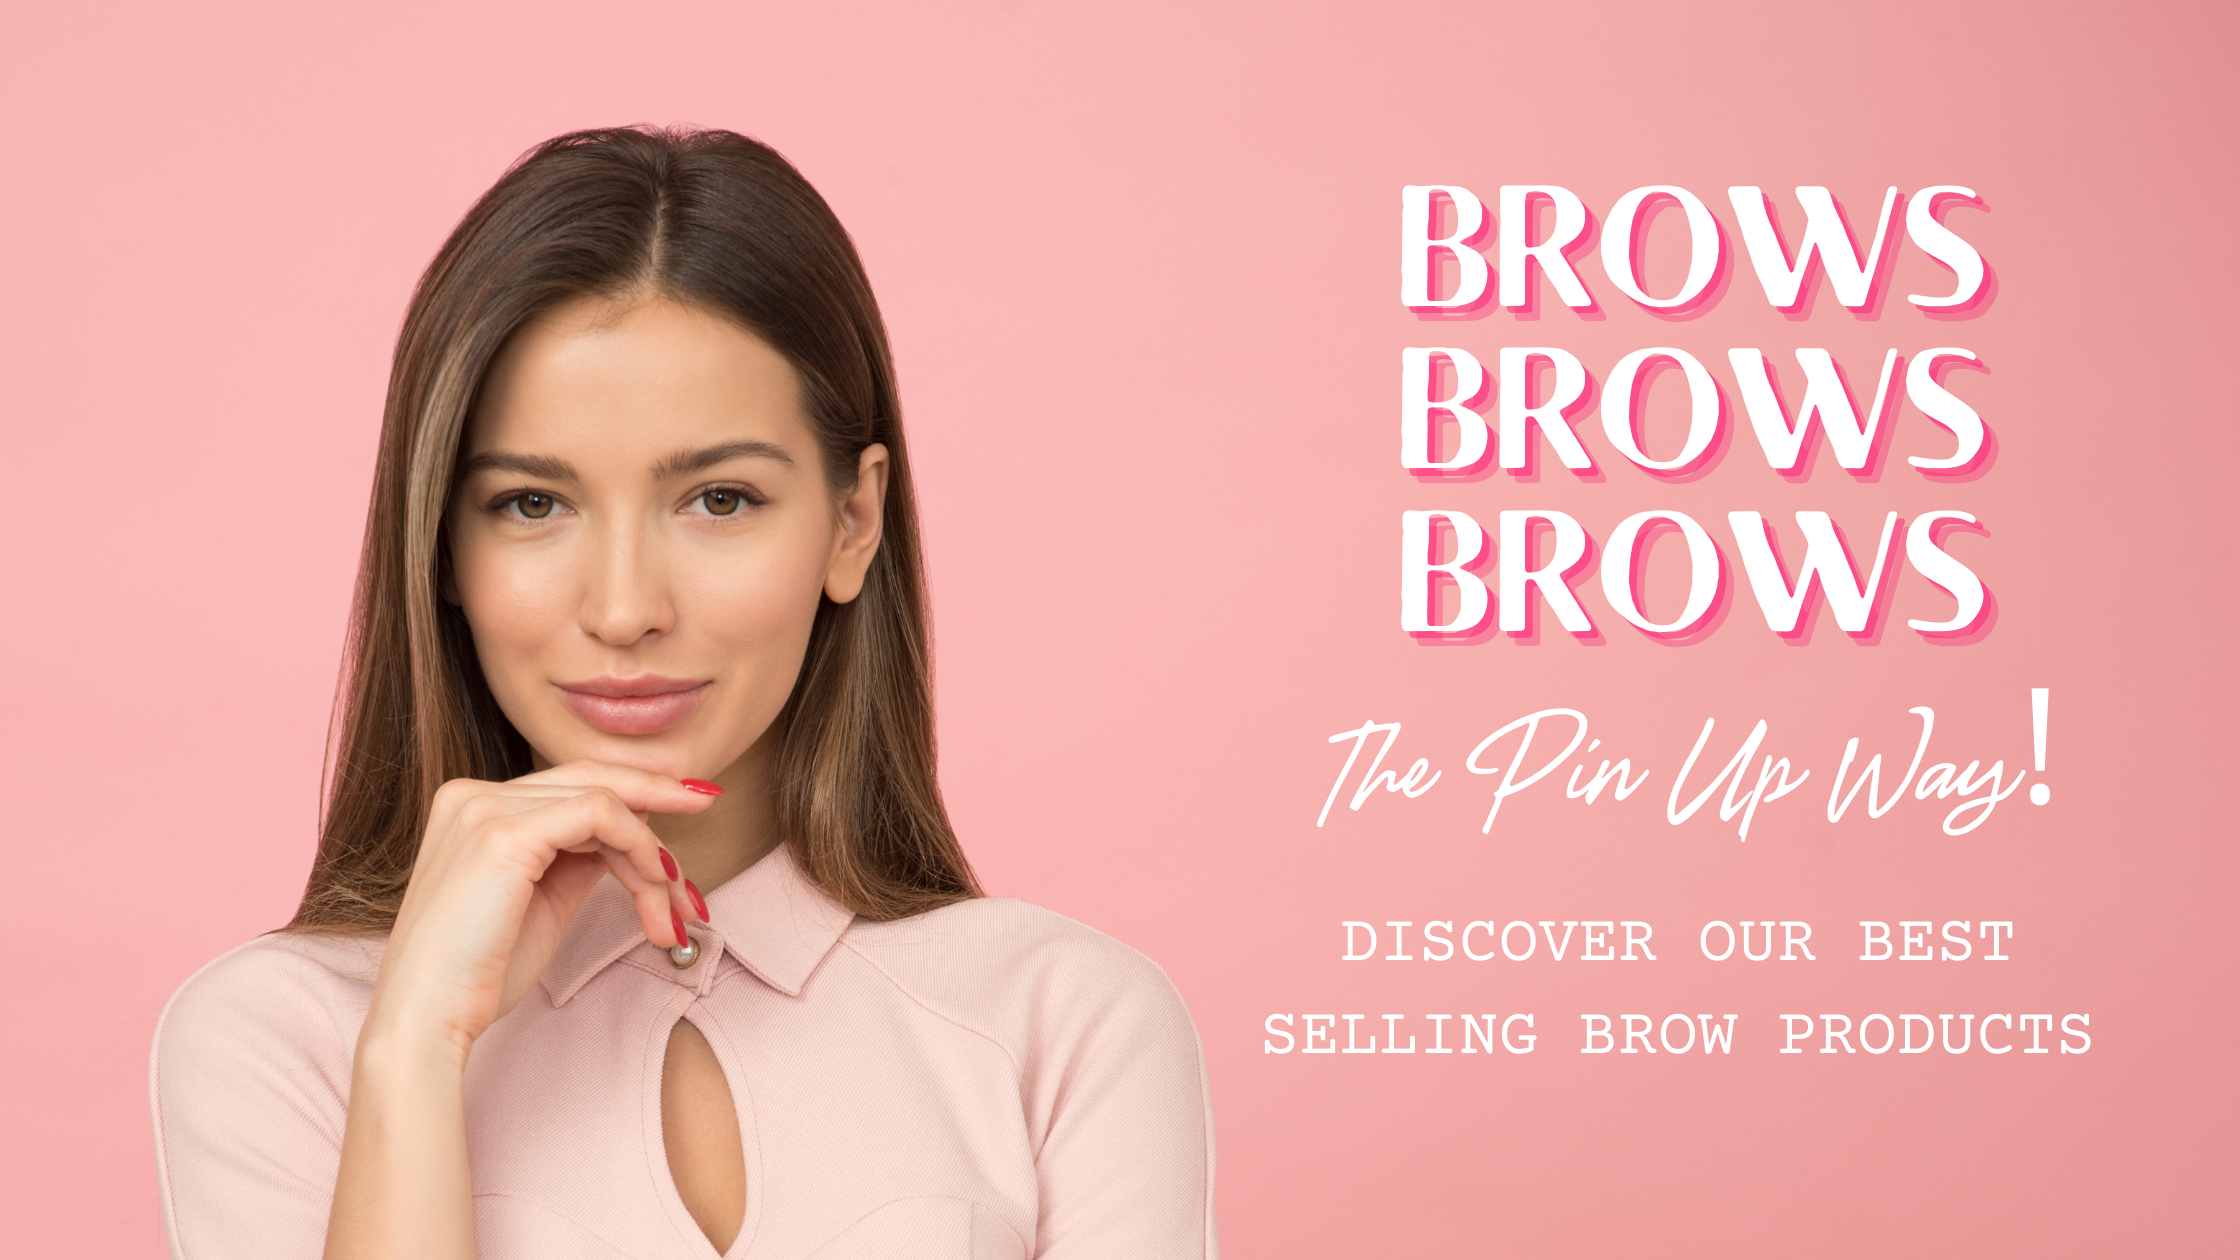 Pretty in Pink Makeup and Skincare Picks - The Beauty Minimalist